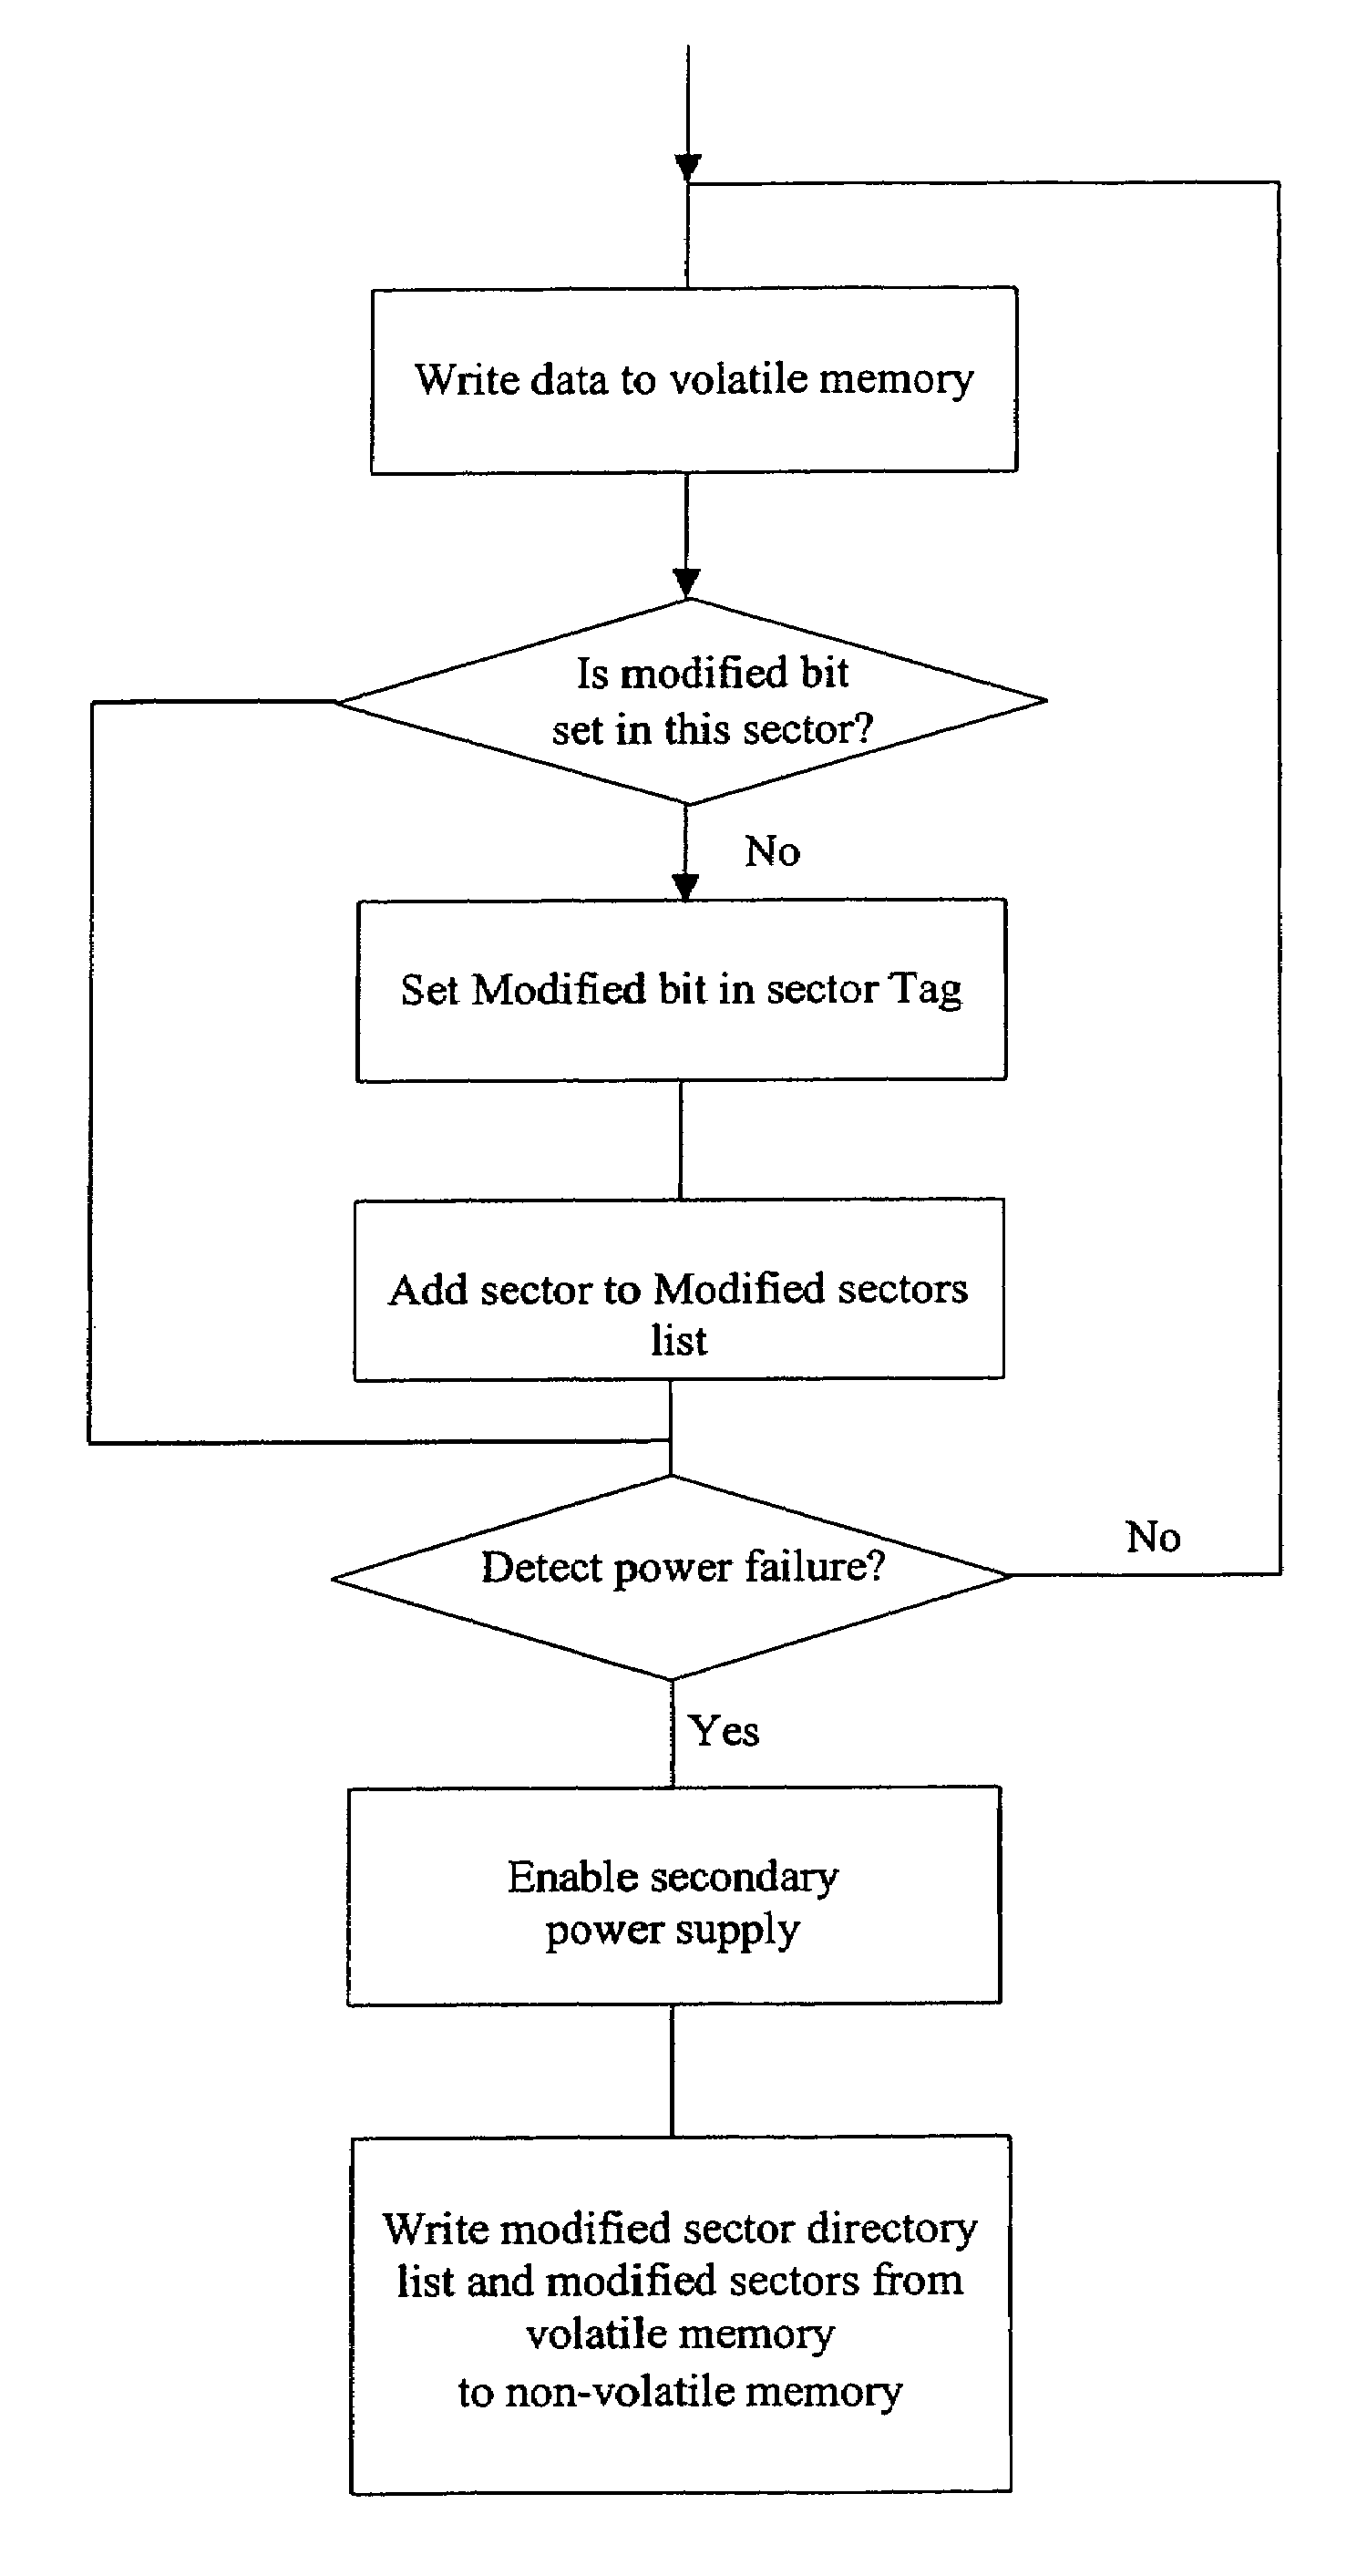 System and method for automatically saving memory contents of a data processing device on power failure